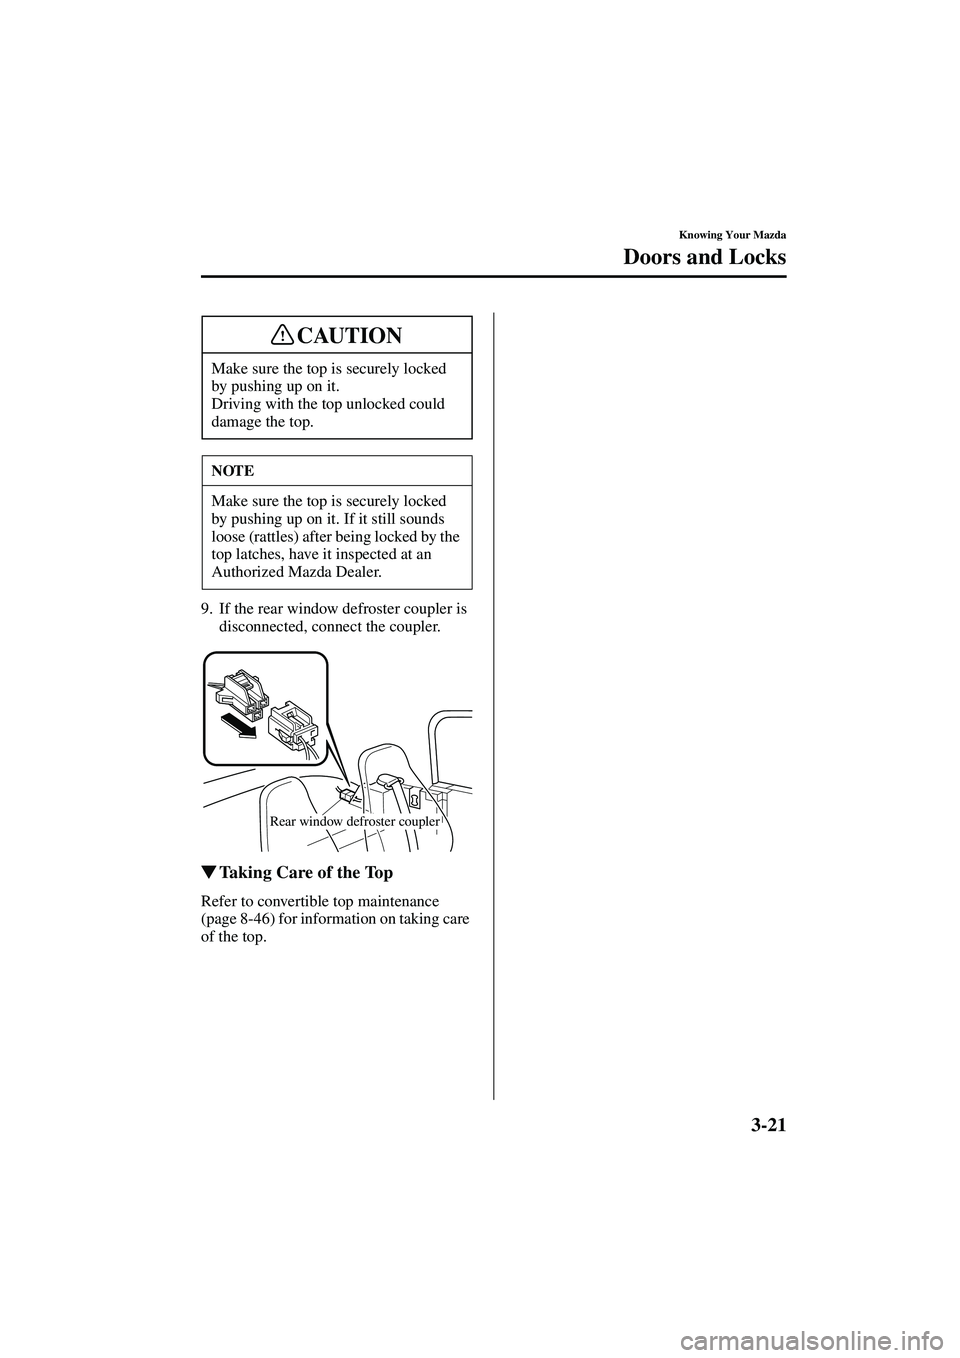 MAZDA MODEL MX-5 MIATA 2003 Workshop Manual 3-21
Knowing Your Mazda
Doors and Locks
Form No. 8R09-EA-02G
9. If the rear window defroster coupler is disconnected, connect the coupler.
Taking Care of the Top
Refer to convertible top maintenance 